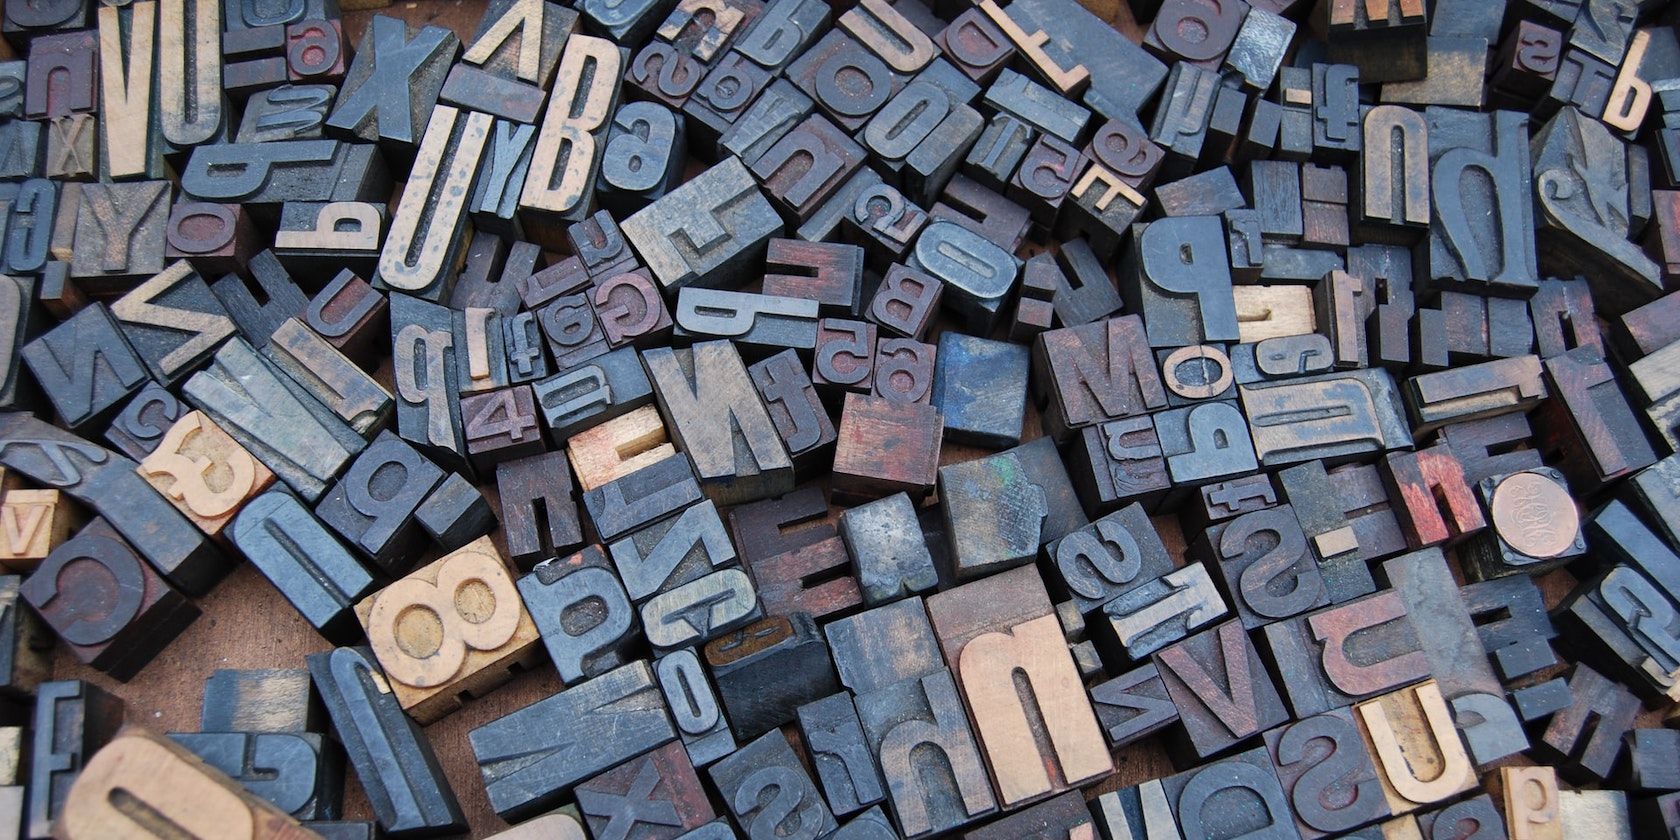 A photograph of various metal letterpress type characters